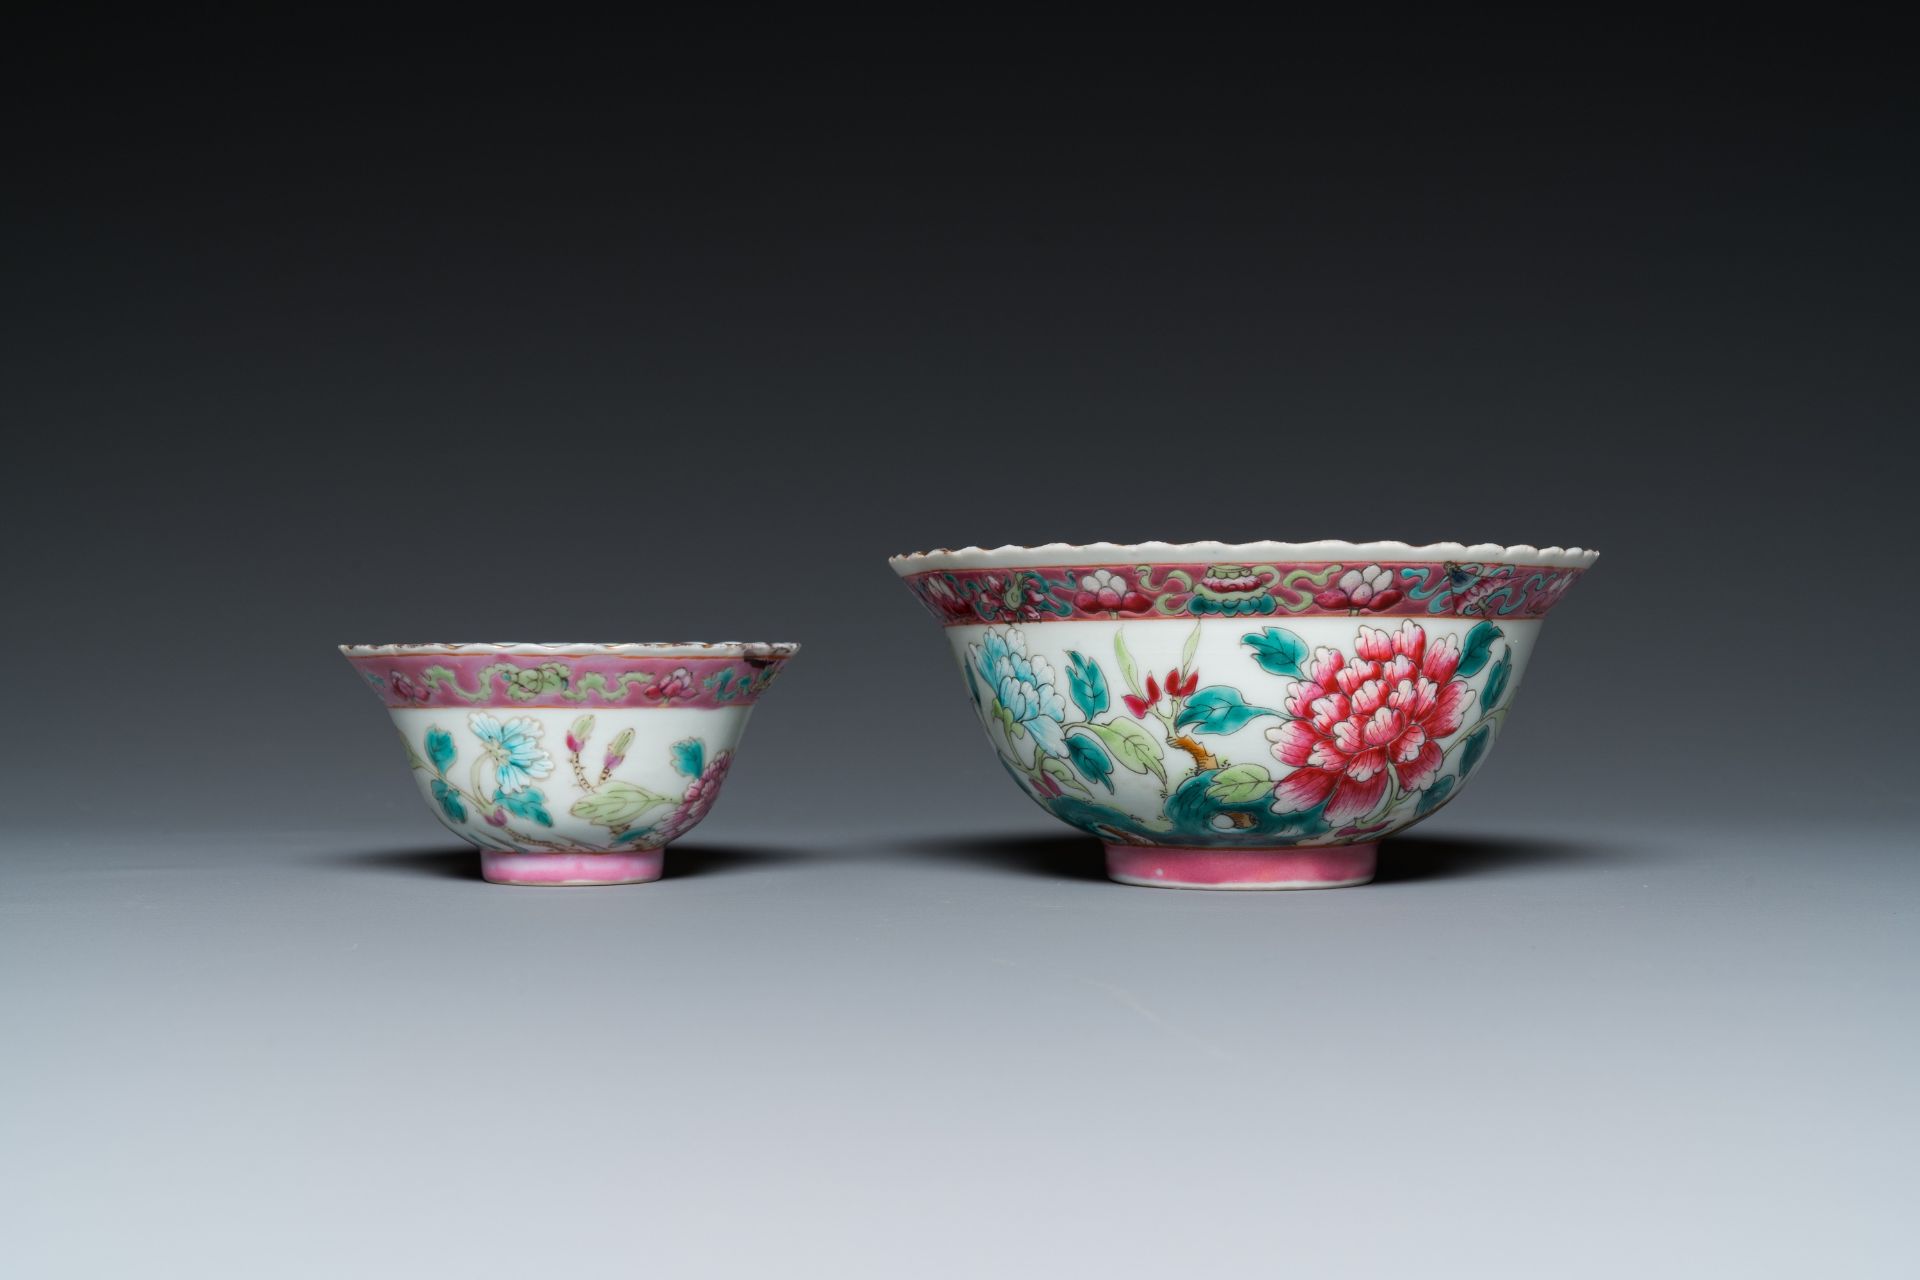 21 Chinese famille rose wares for the Straits or Peranakan market, 19th C. - Image 6 of 13